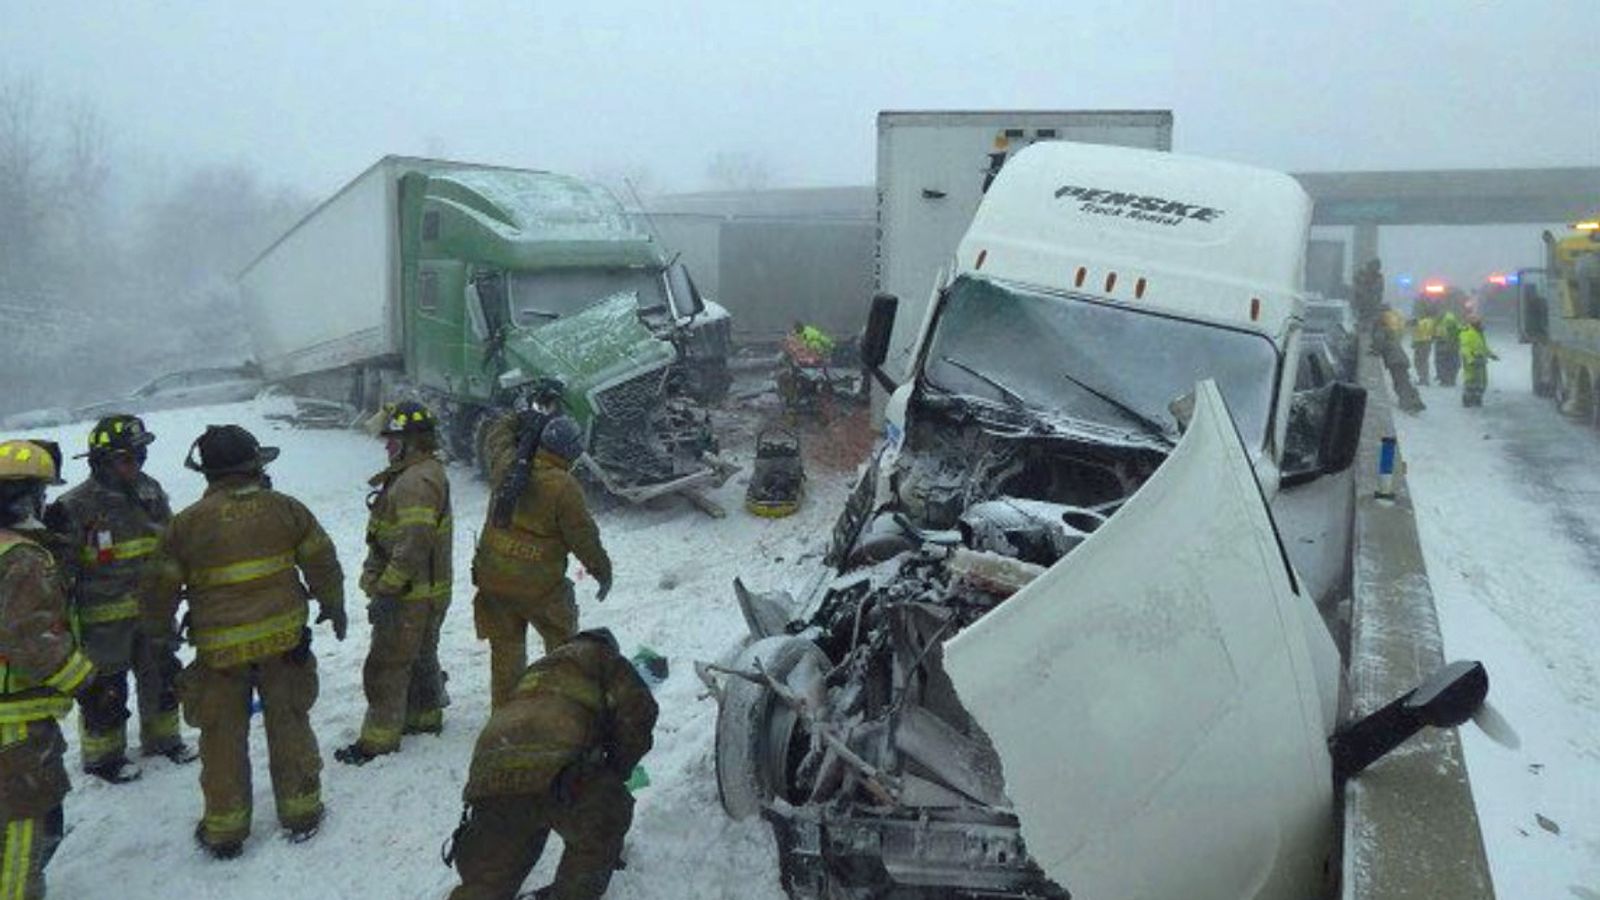 Four killed in massive crash on icy road; thousands of flights grounded; homes without power | US bomb cyclone latest